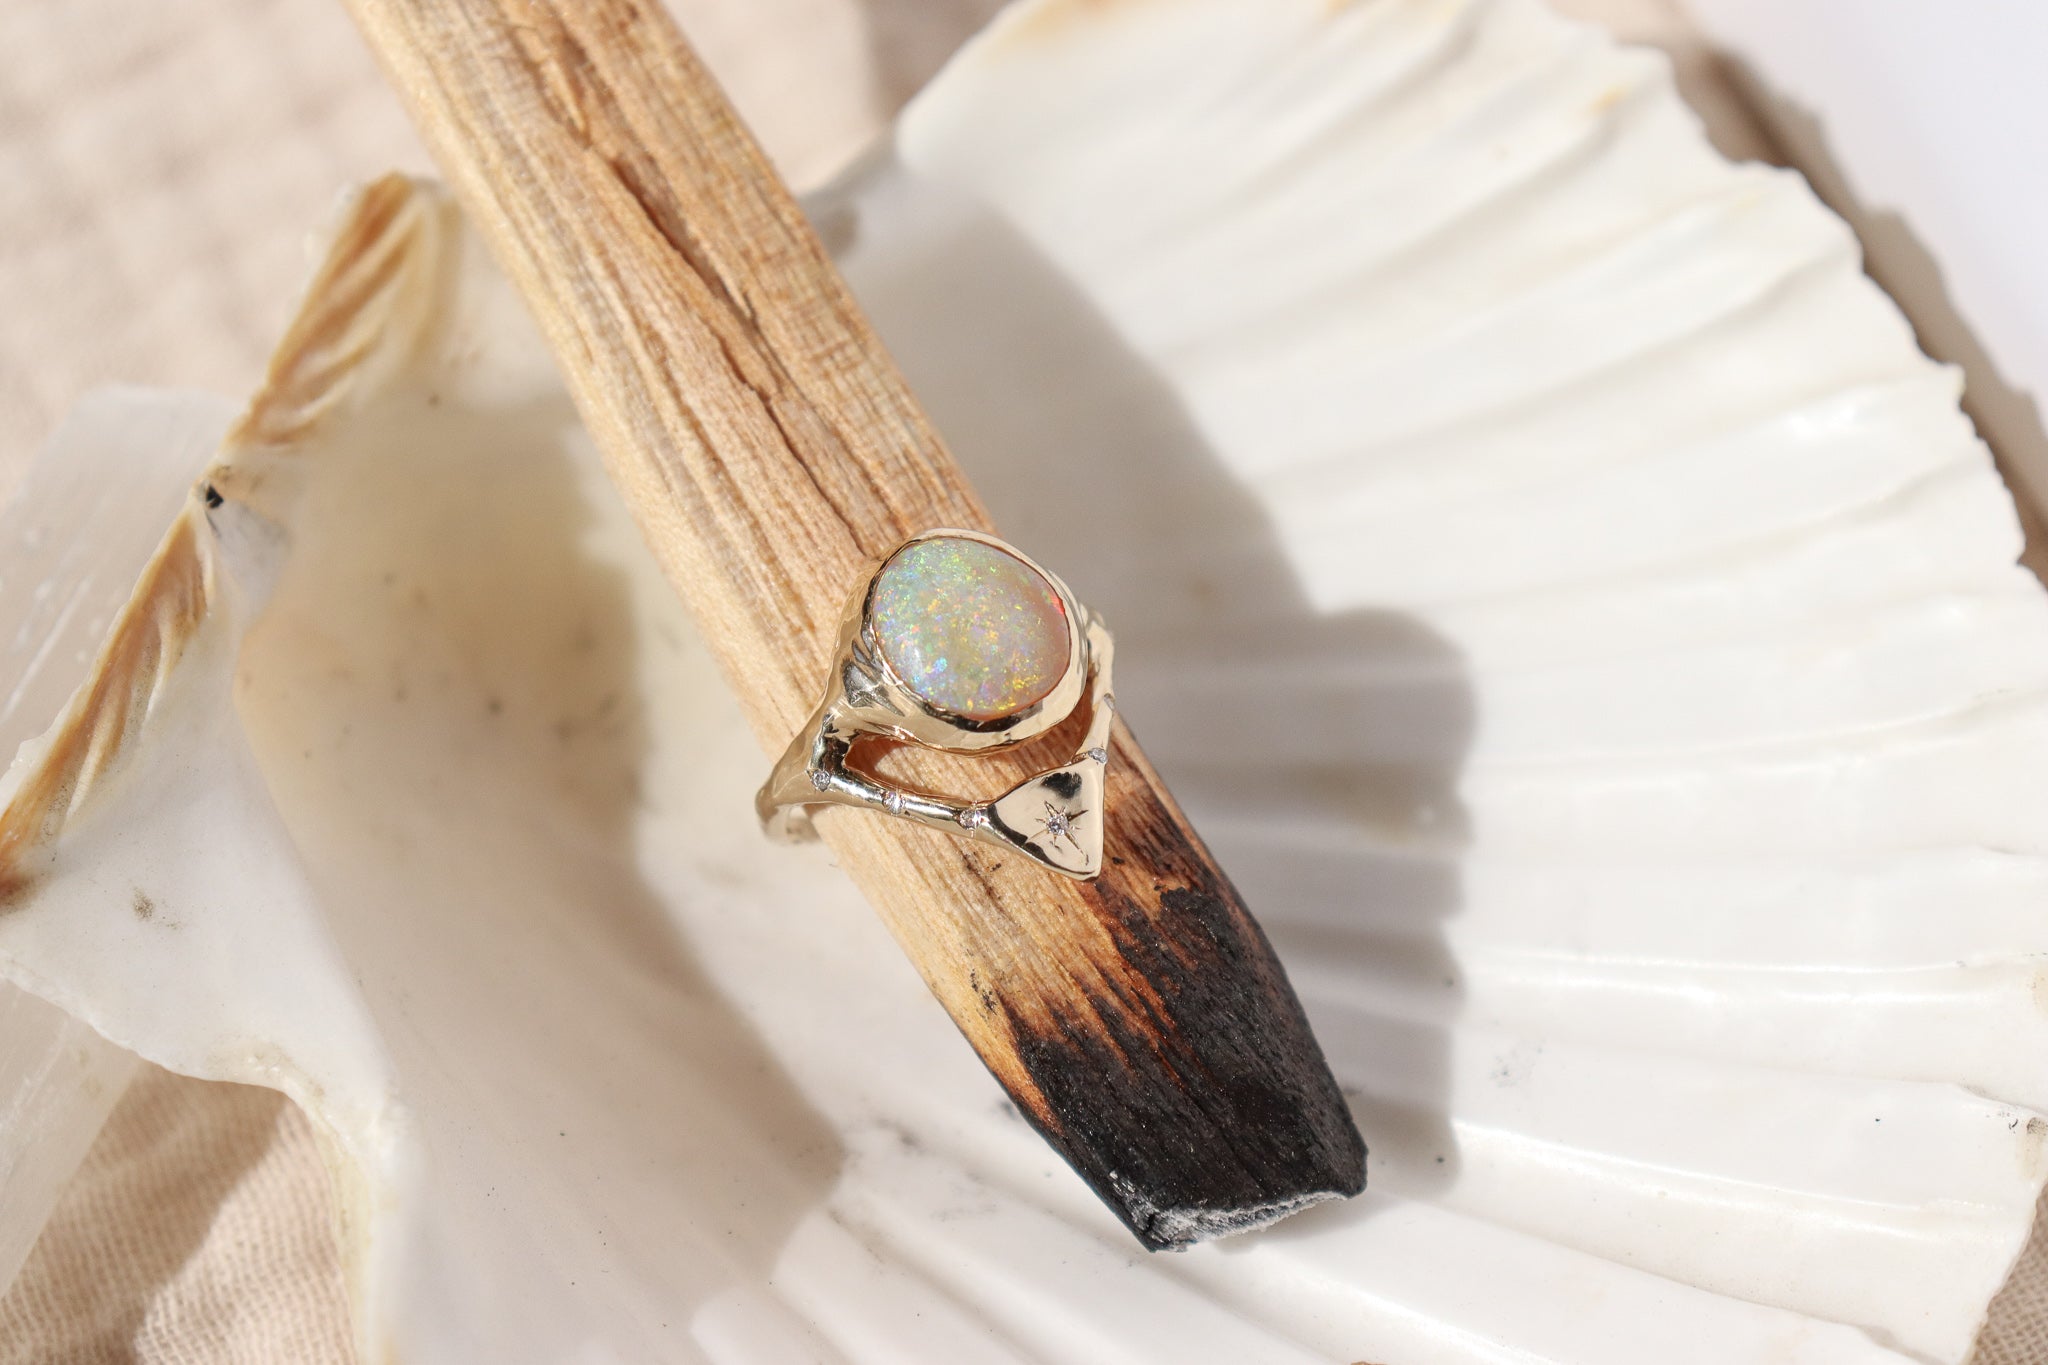 gold opal ring with diamonds is pictured on a palo santo stick and seashell dish